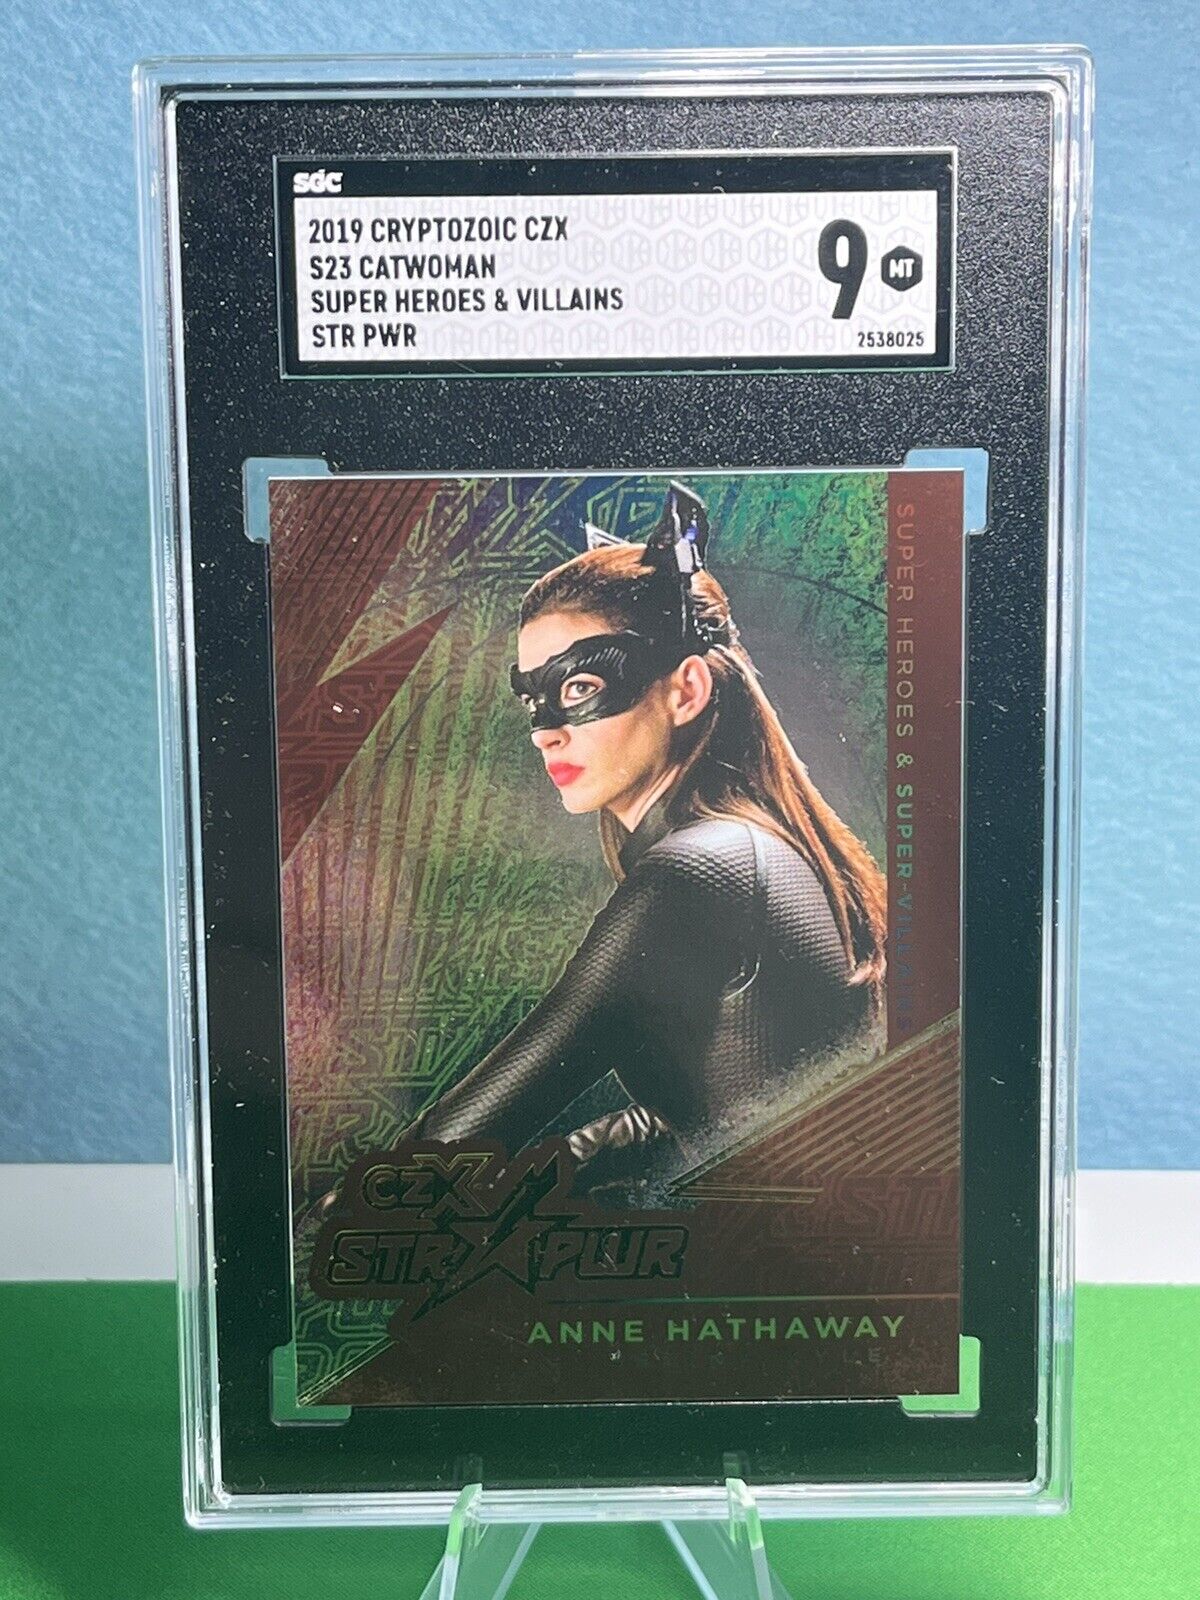 2019 Cryptozoic CZX DC Super Heroes & Villains Catwoman Anne Hathaway #S23 SGC 9